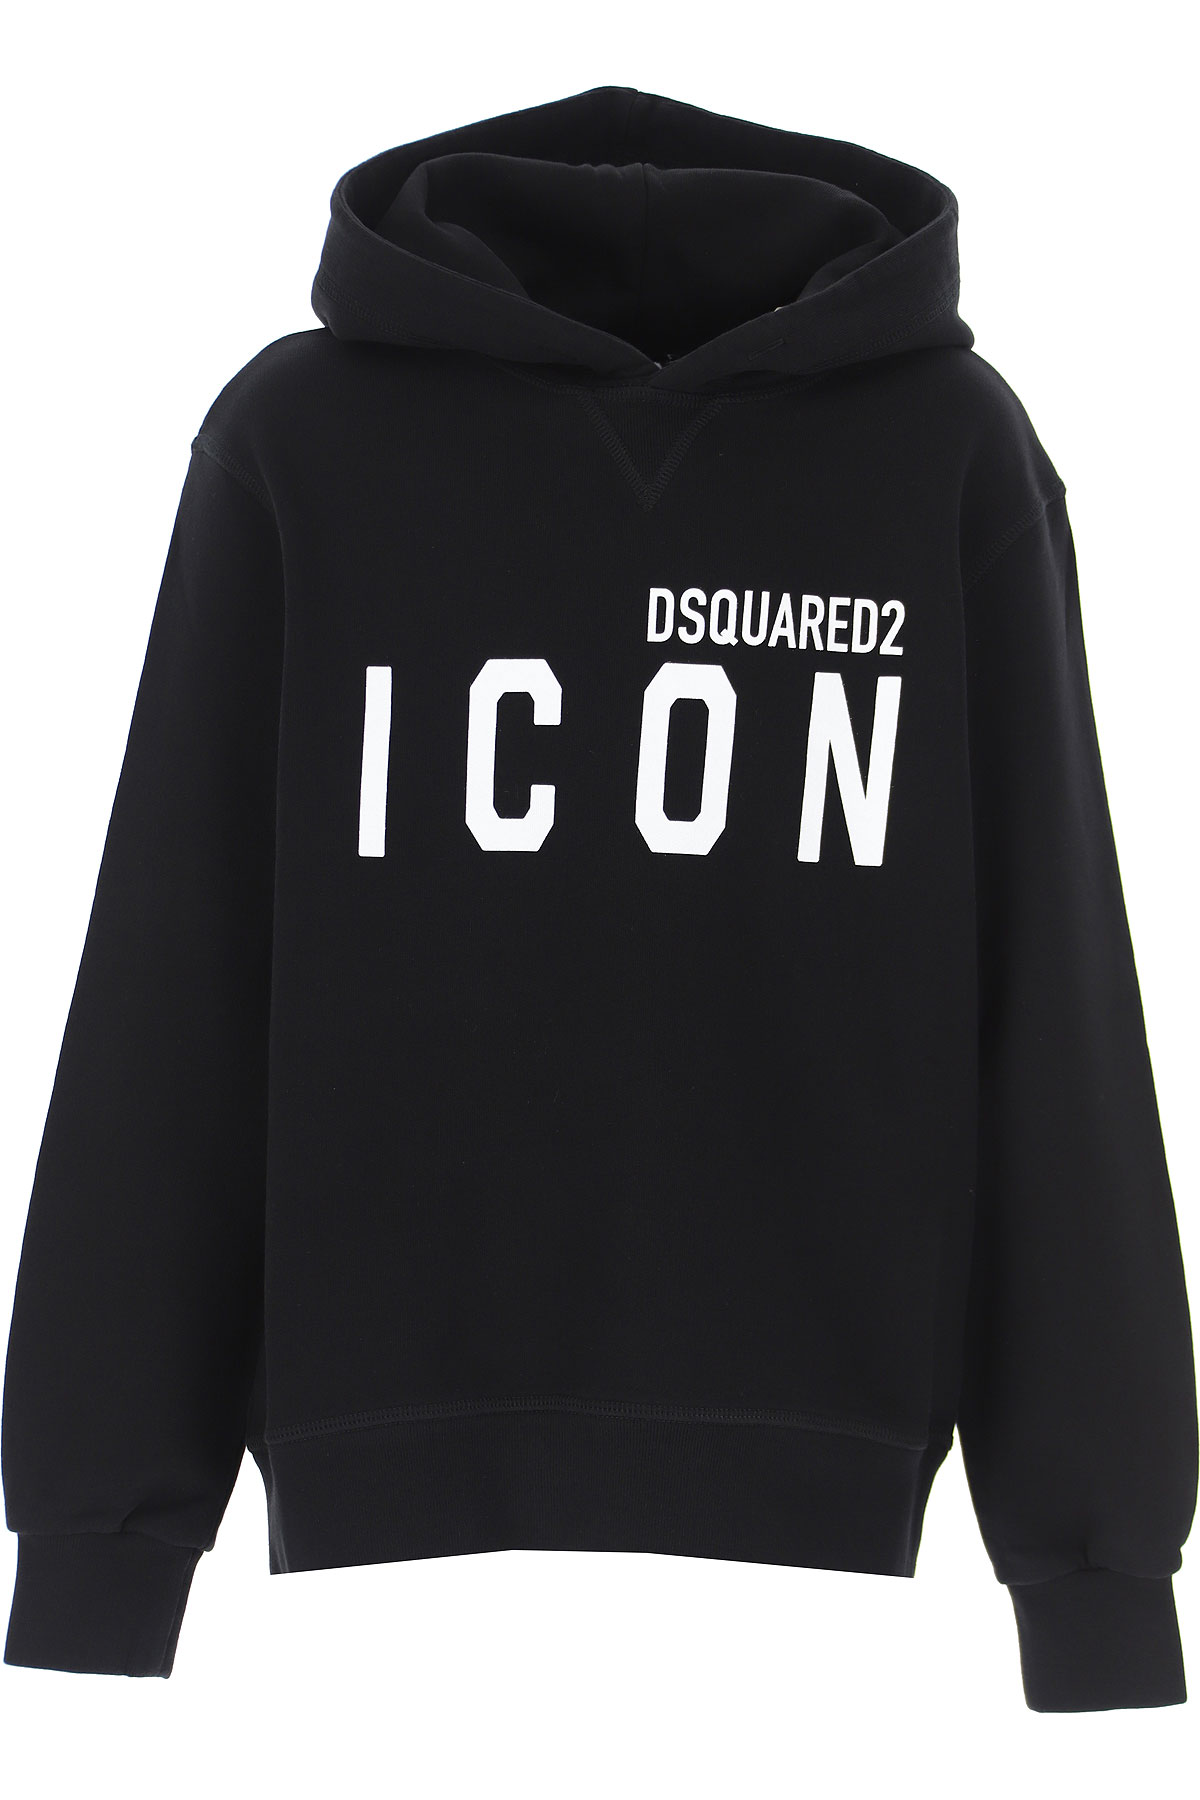 Kidswear Dsquared2, Style code: dq049v-d002y-dq900